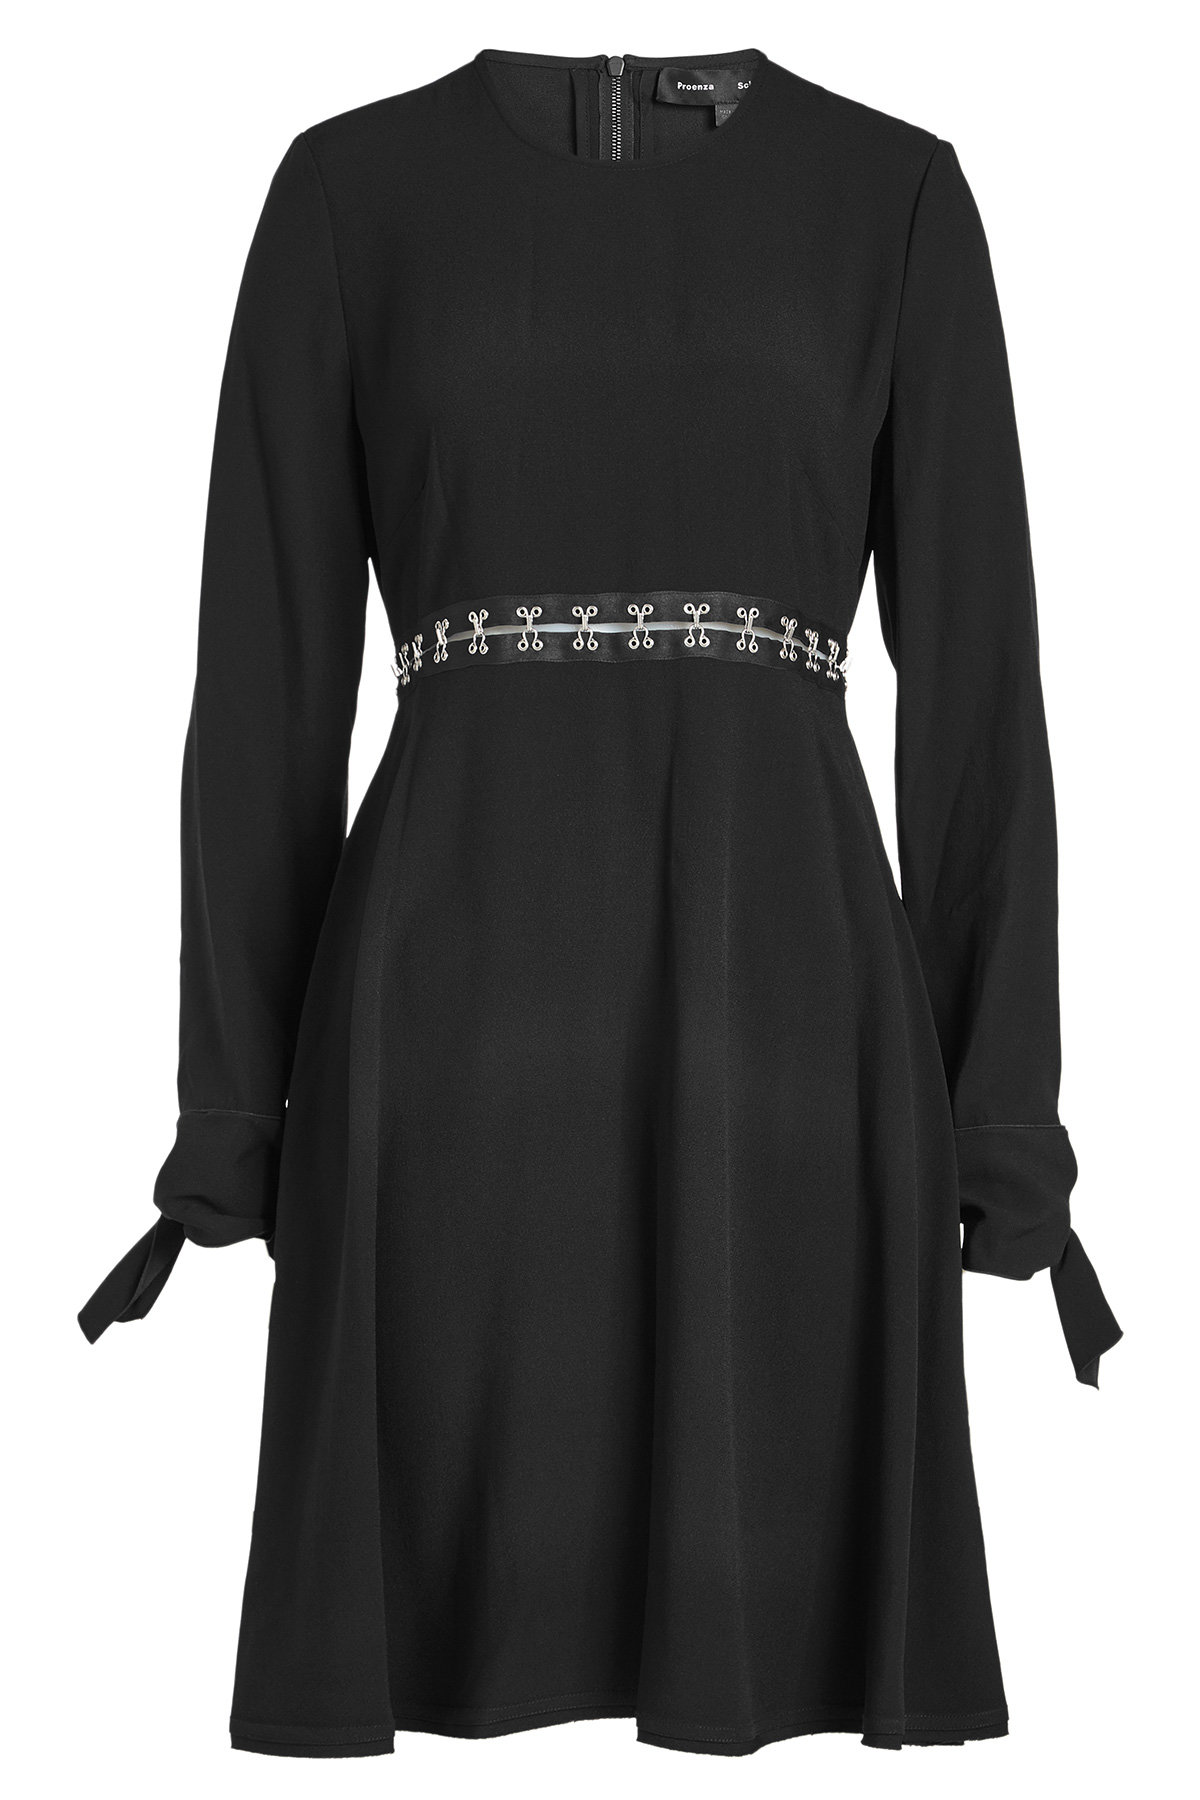 Proenza Schouler - Crepe Dress with Embellished Waist